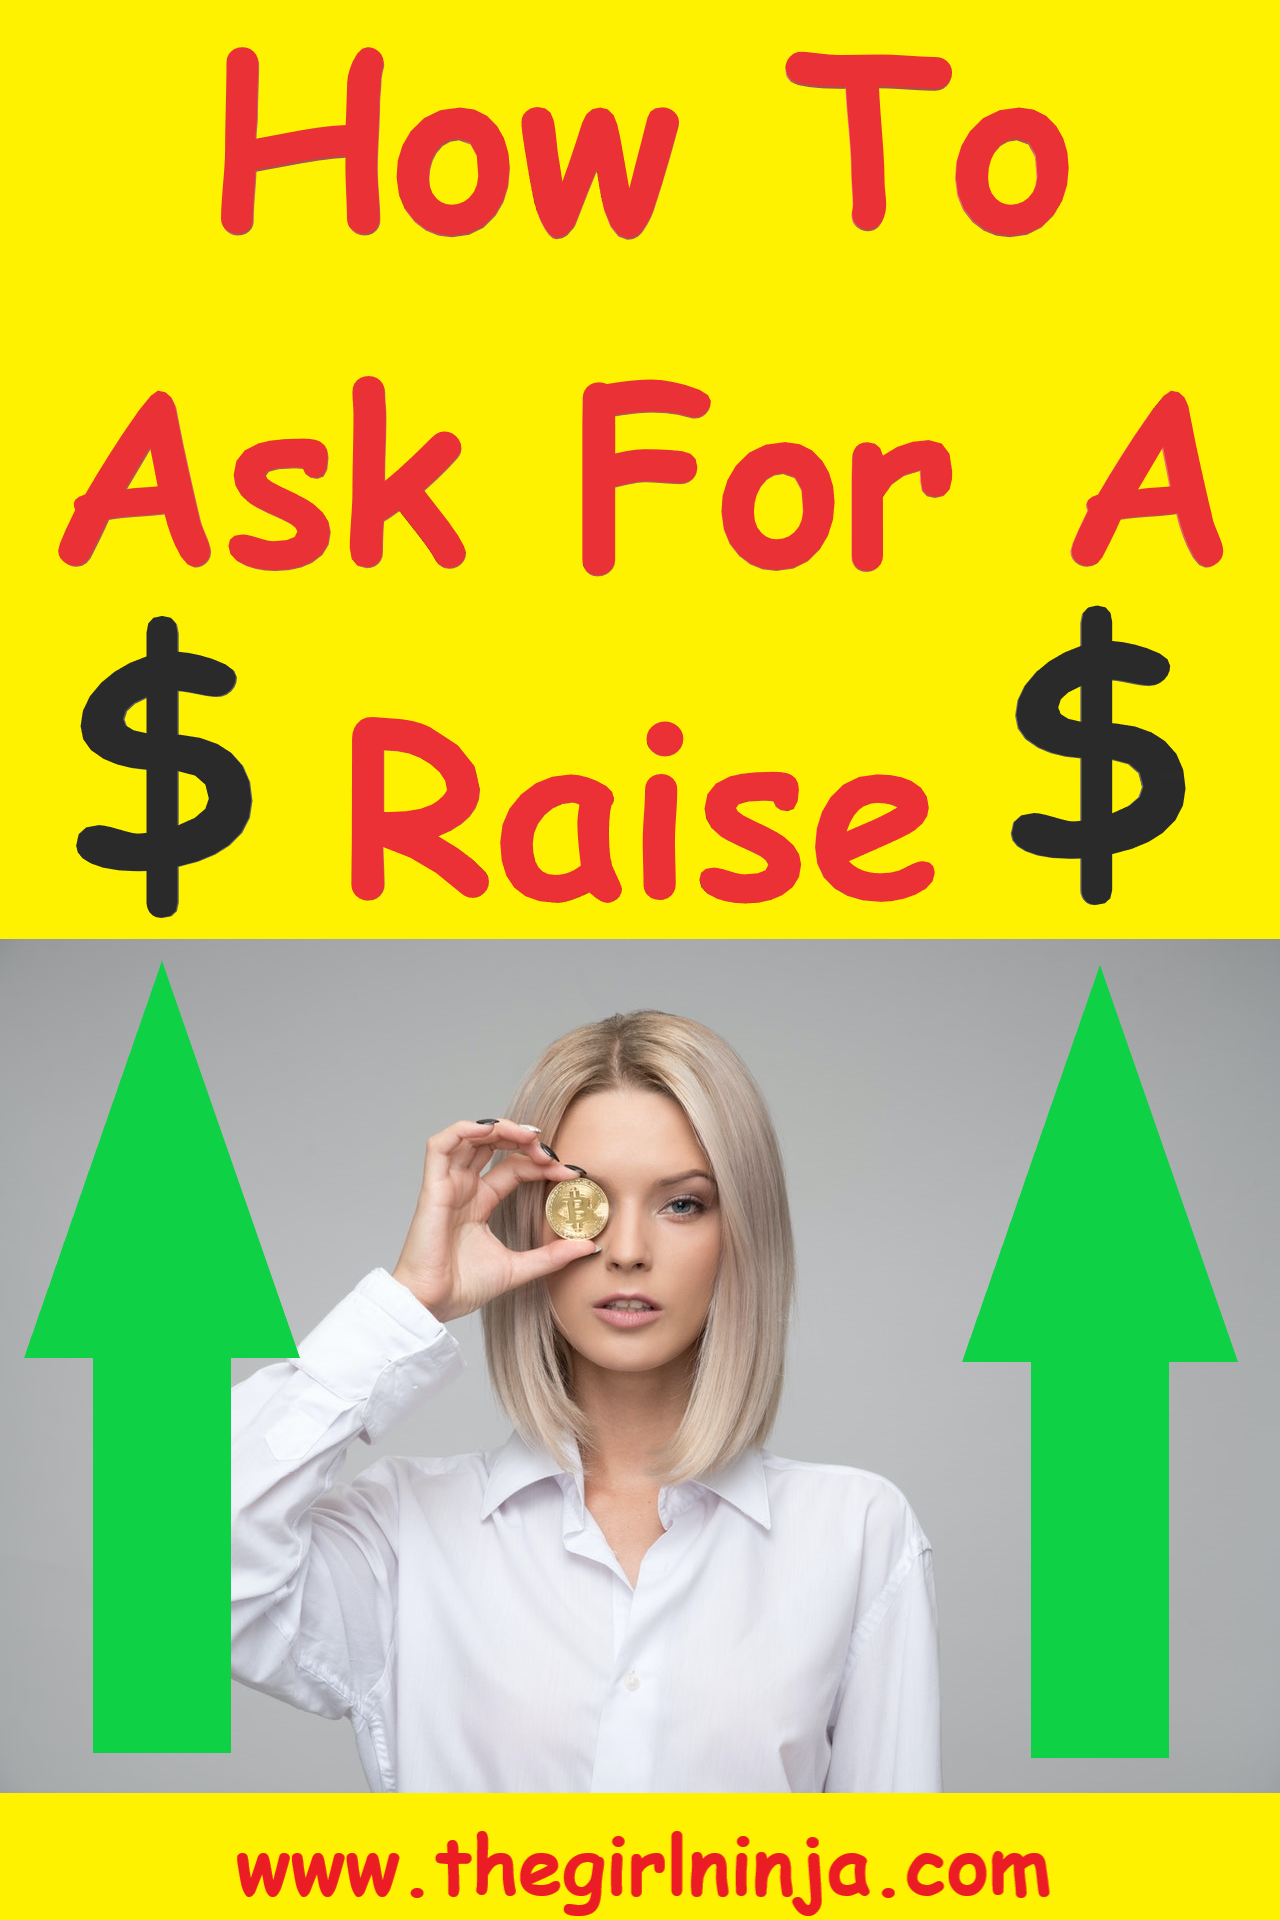 Yellow rectangle with red text at top that reads How To Ask For A Raise. A Large black dollar sign is on each side of the word Raise. Below red text girl with blonde straight hair stands in white button down blouse holding a gold coin up to her right eye. On each side of the woman are green arrows pointing up. At bottom center red text reads www.thegirlninja.com